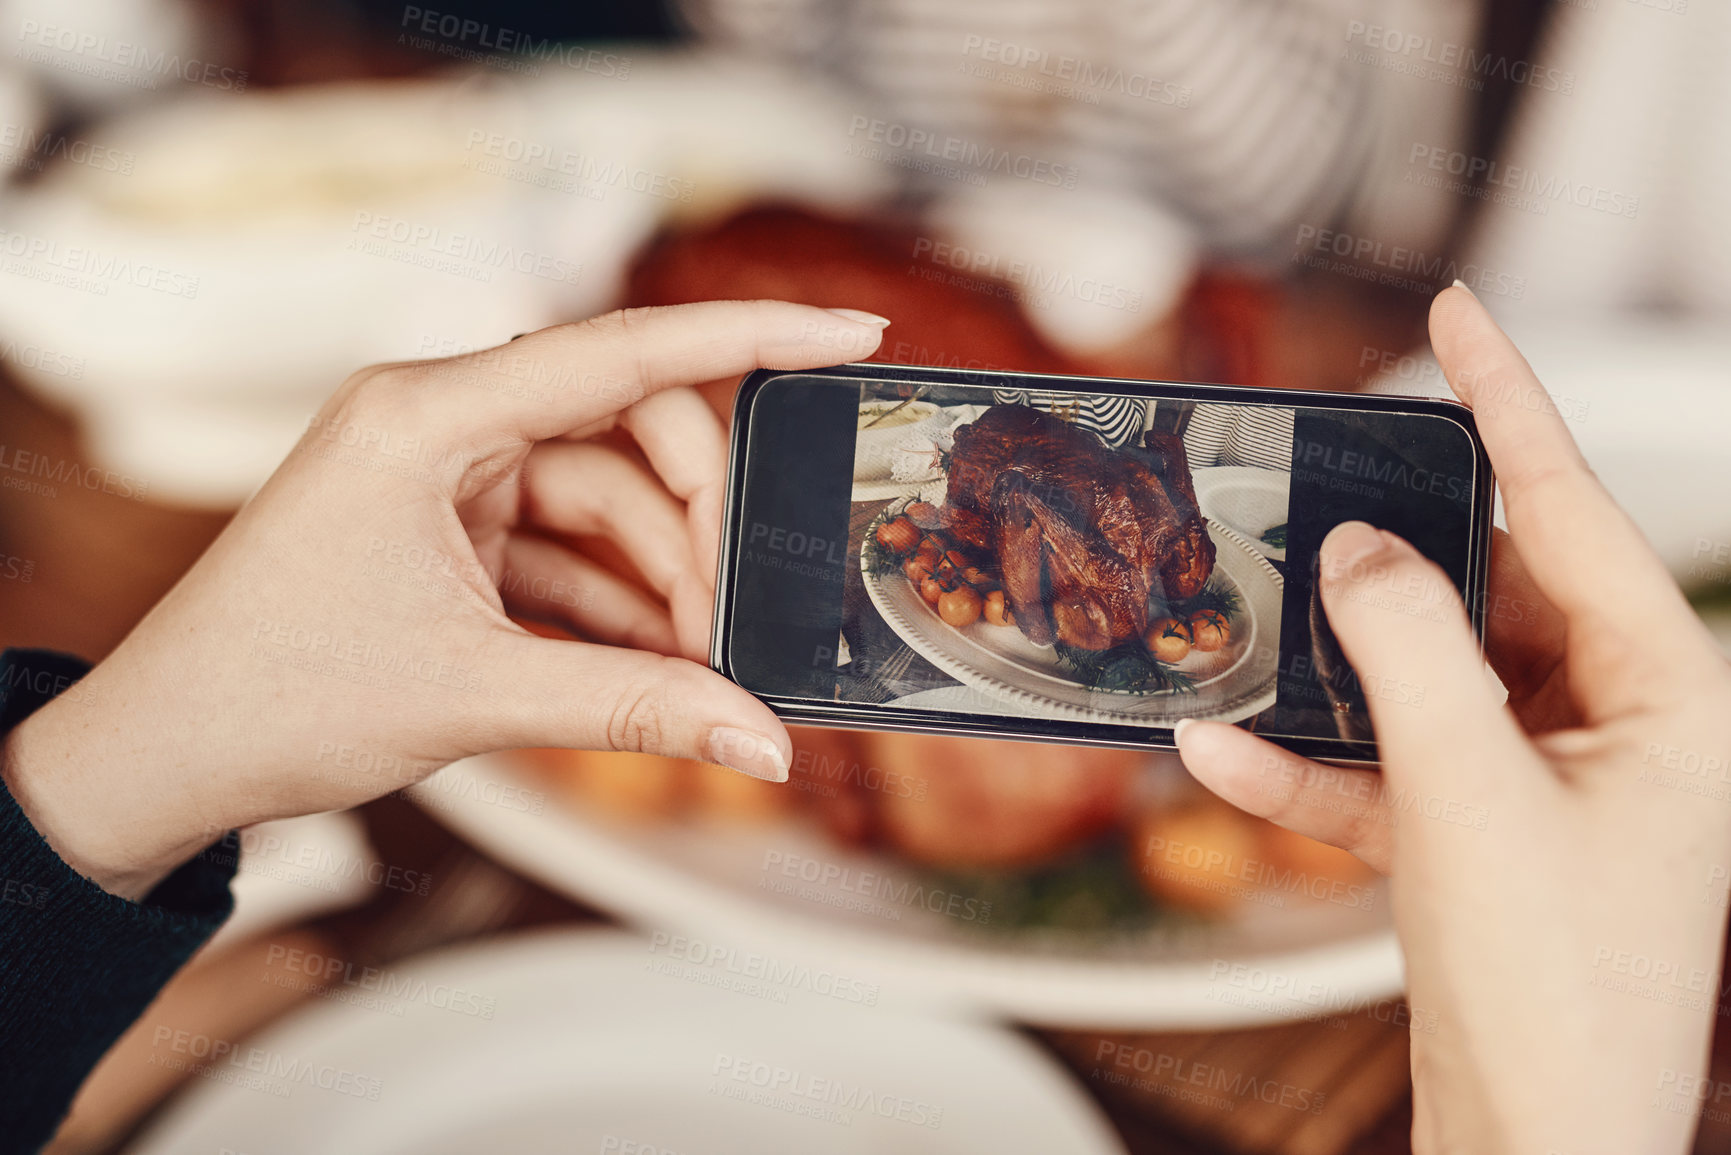 Buy stock photo Phone, photograph and thanksgiving with the hands of a woman taking a picture of food on a dinner table. Mobile, social media and Christmas with a female using her smartphone to photo a roast meal